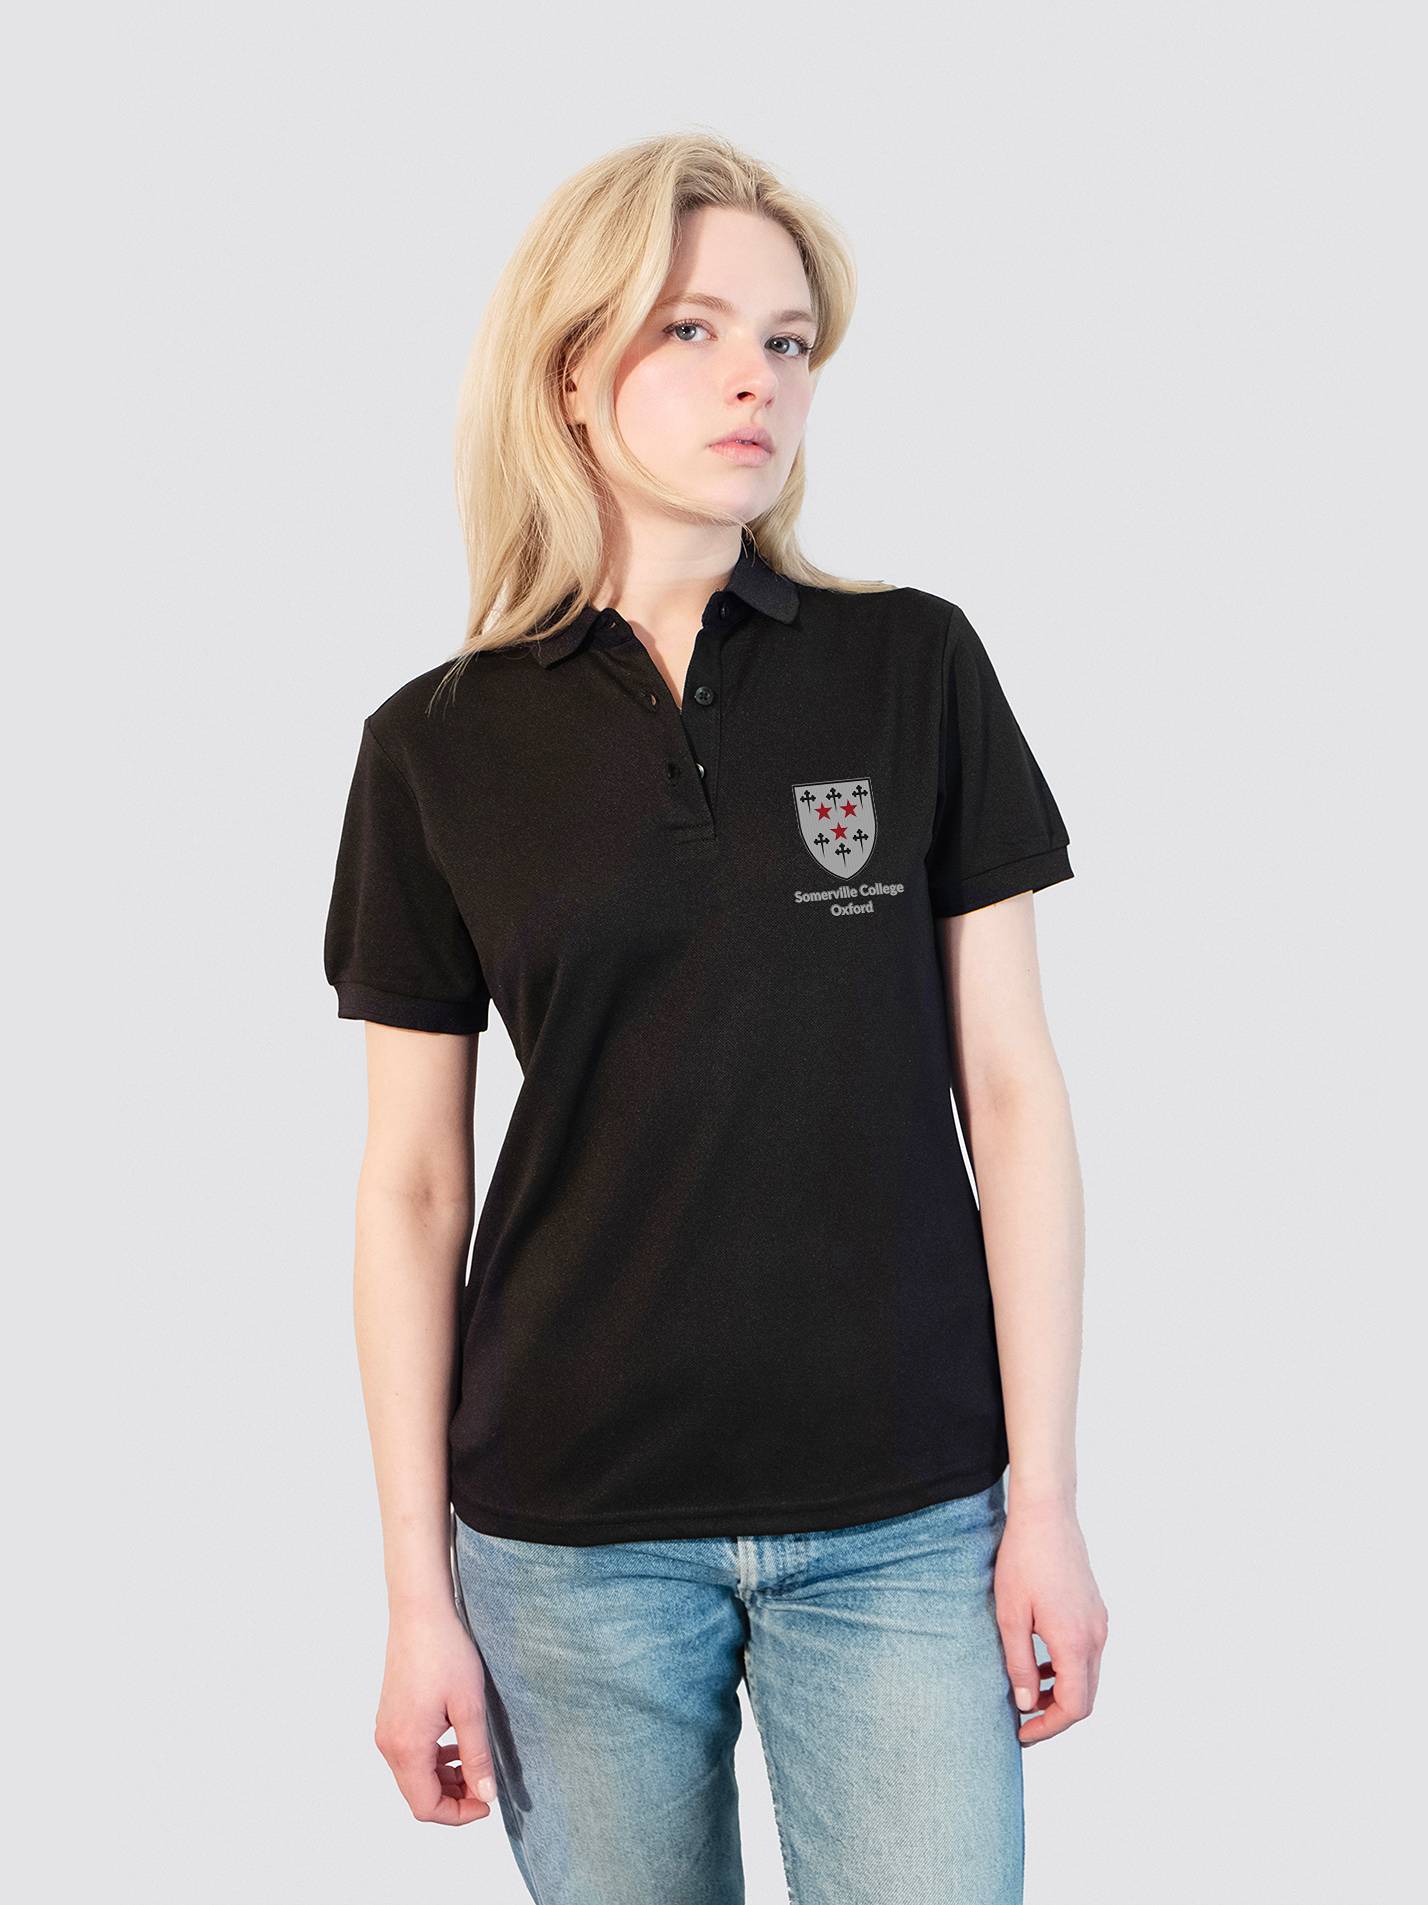 Somerville College Oxford JCR Traditional Crest Sustainable Ladies Polo Shirt